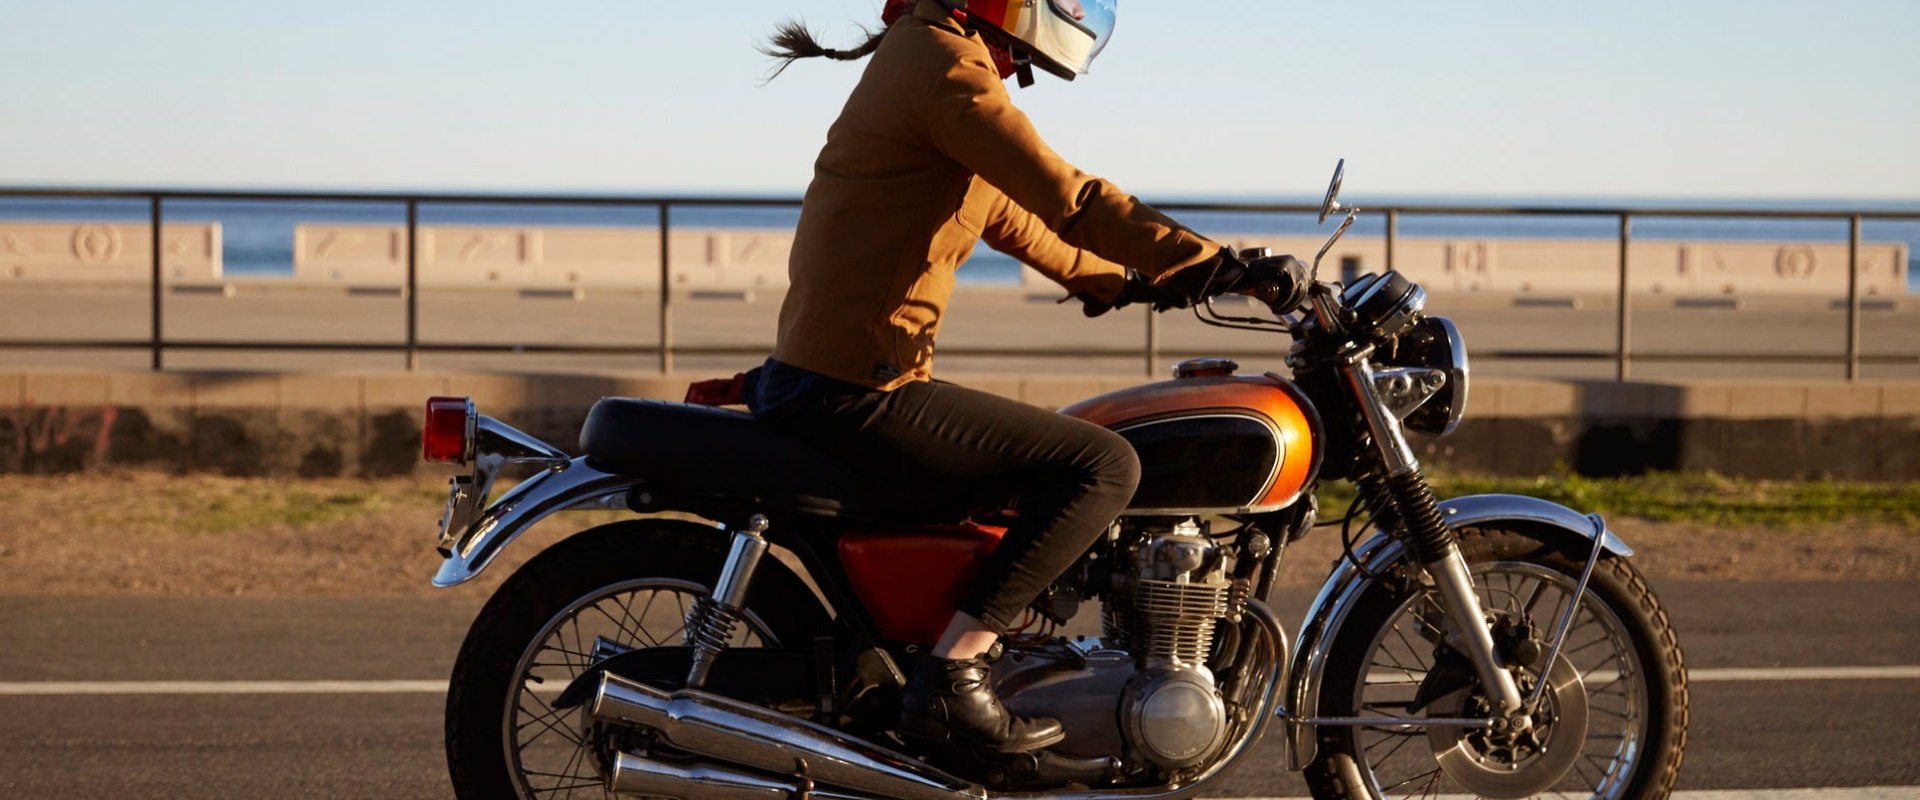 How Much Does Motorcycle Insurance Cost With the General Insurance?